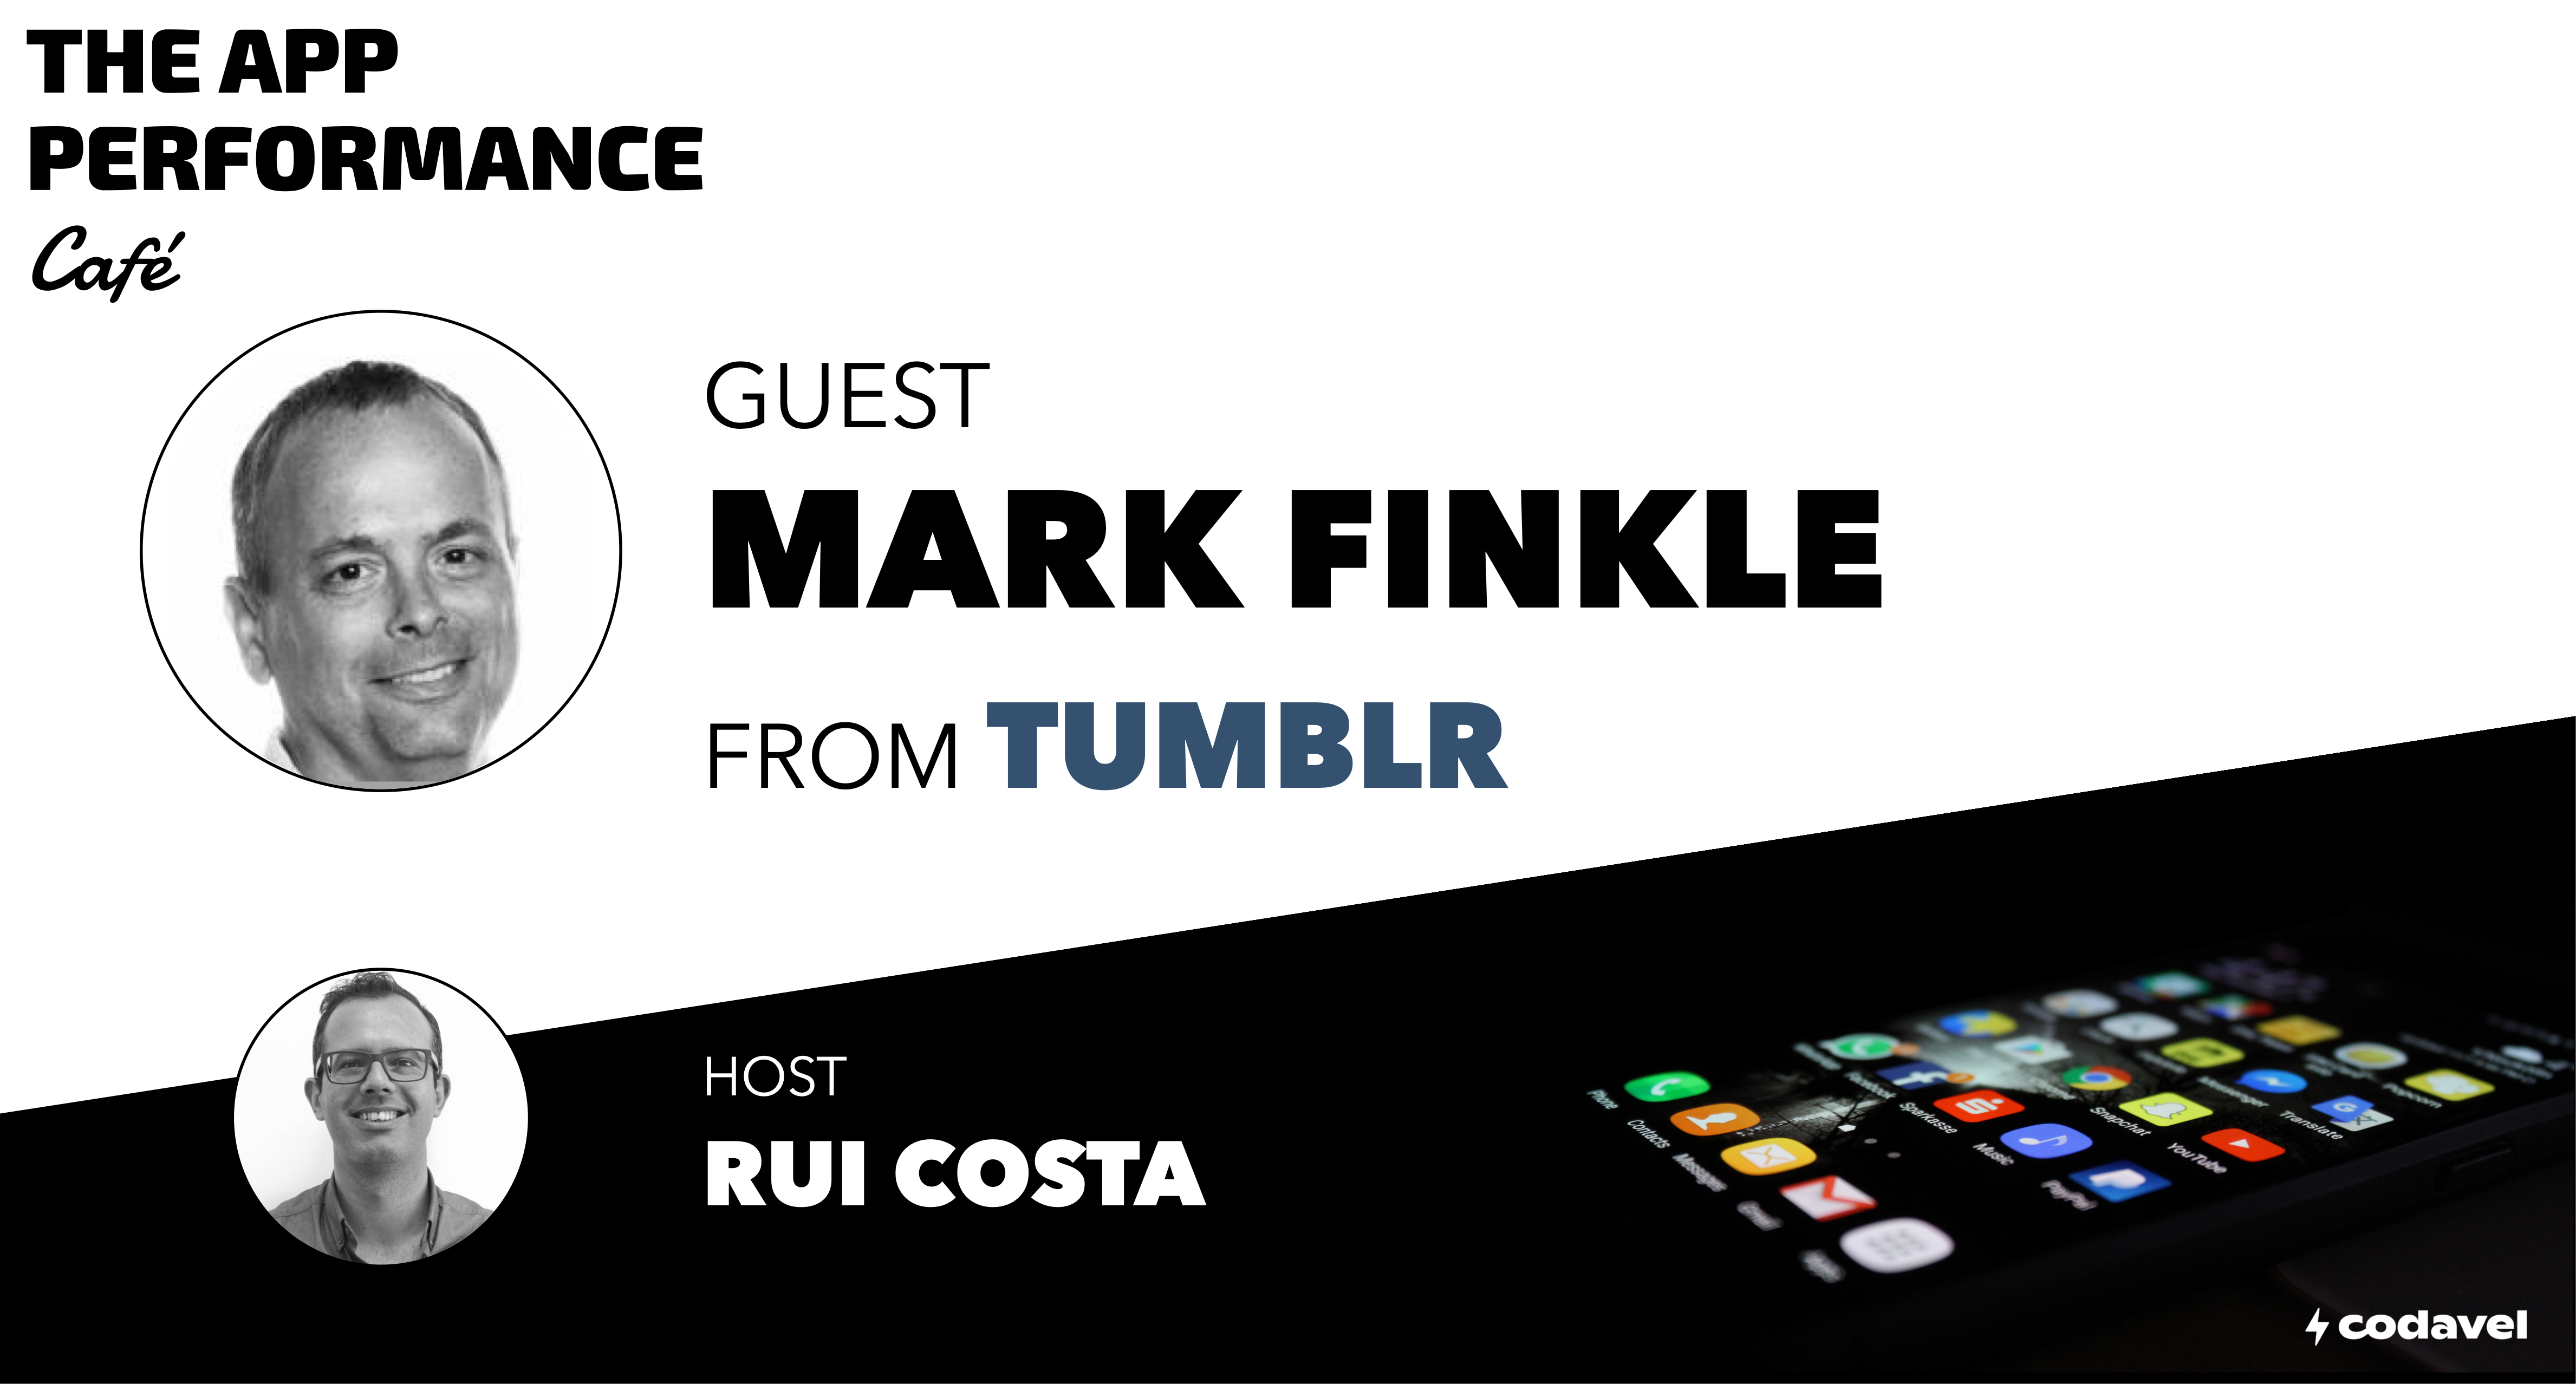 Café with Mark Finkle from Tumblr, on real-user monitoring, optimal performance standards, and lite versions